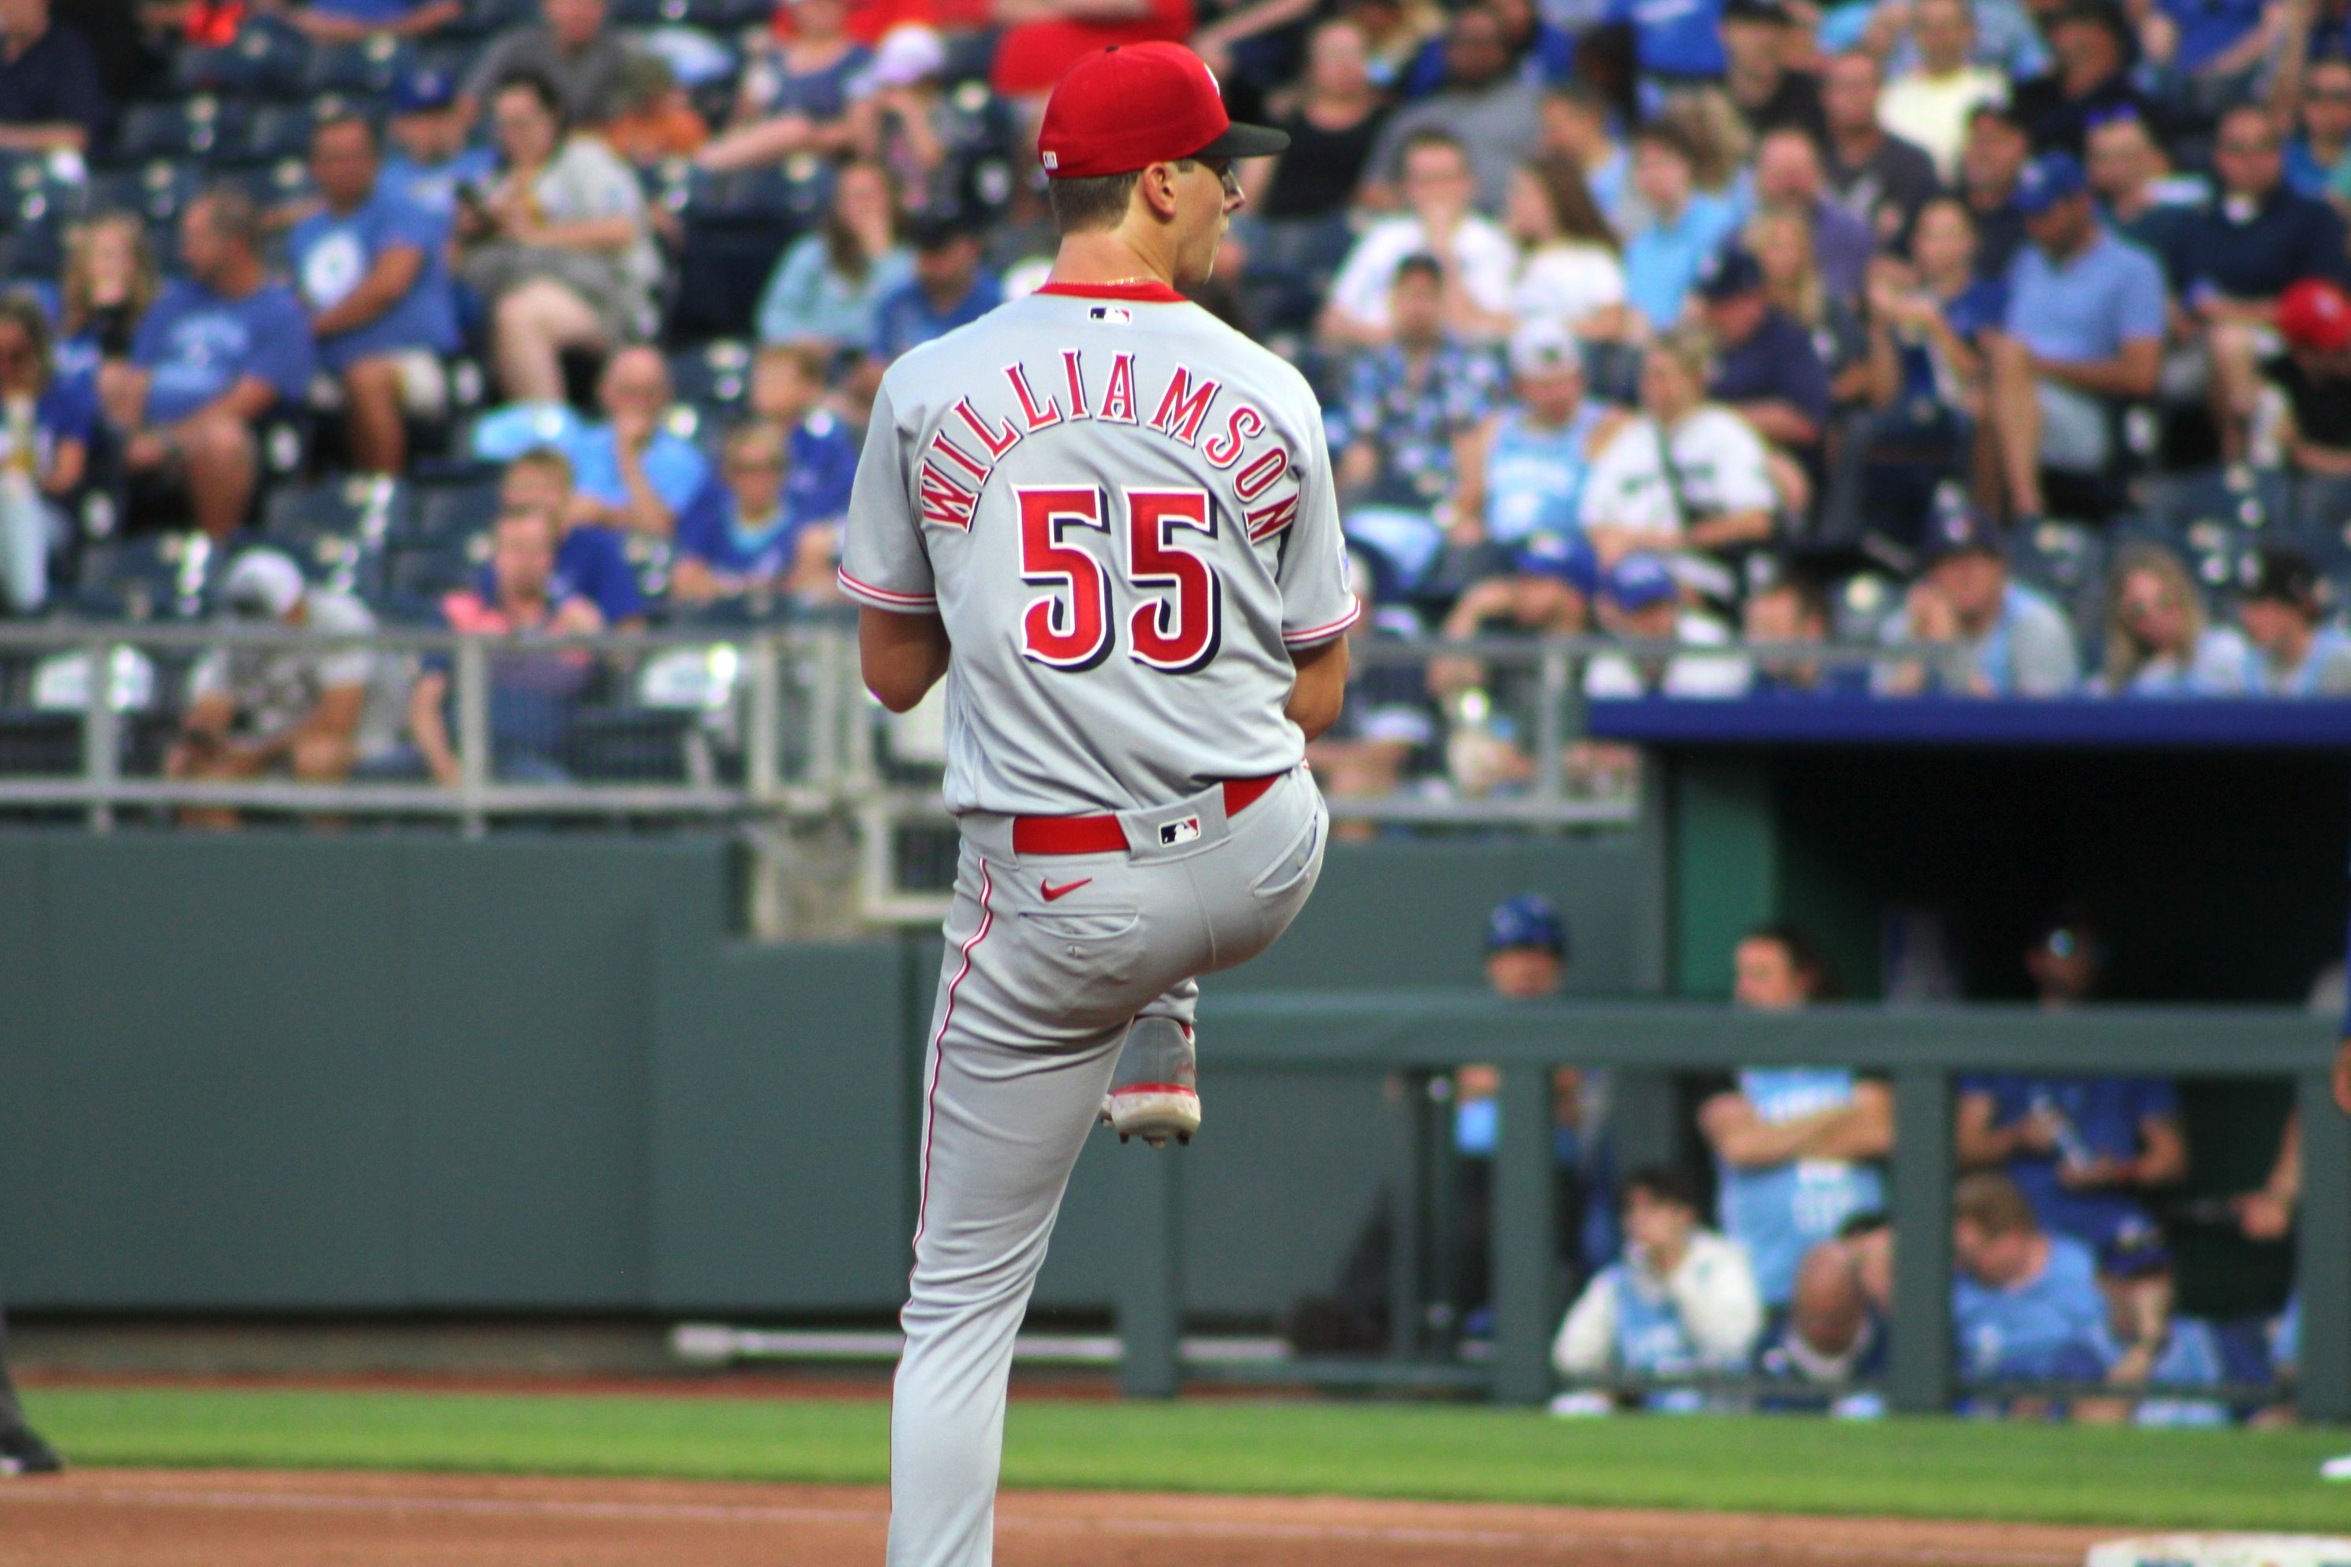 The Reds' Brandon Williamson delivers a pitch in Tuesday's game against the Kansas City Royals at Kaufman Stadium in Kansas City.